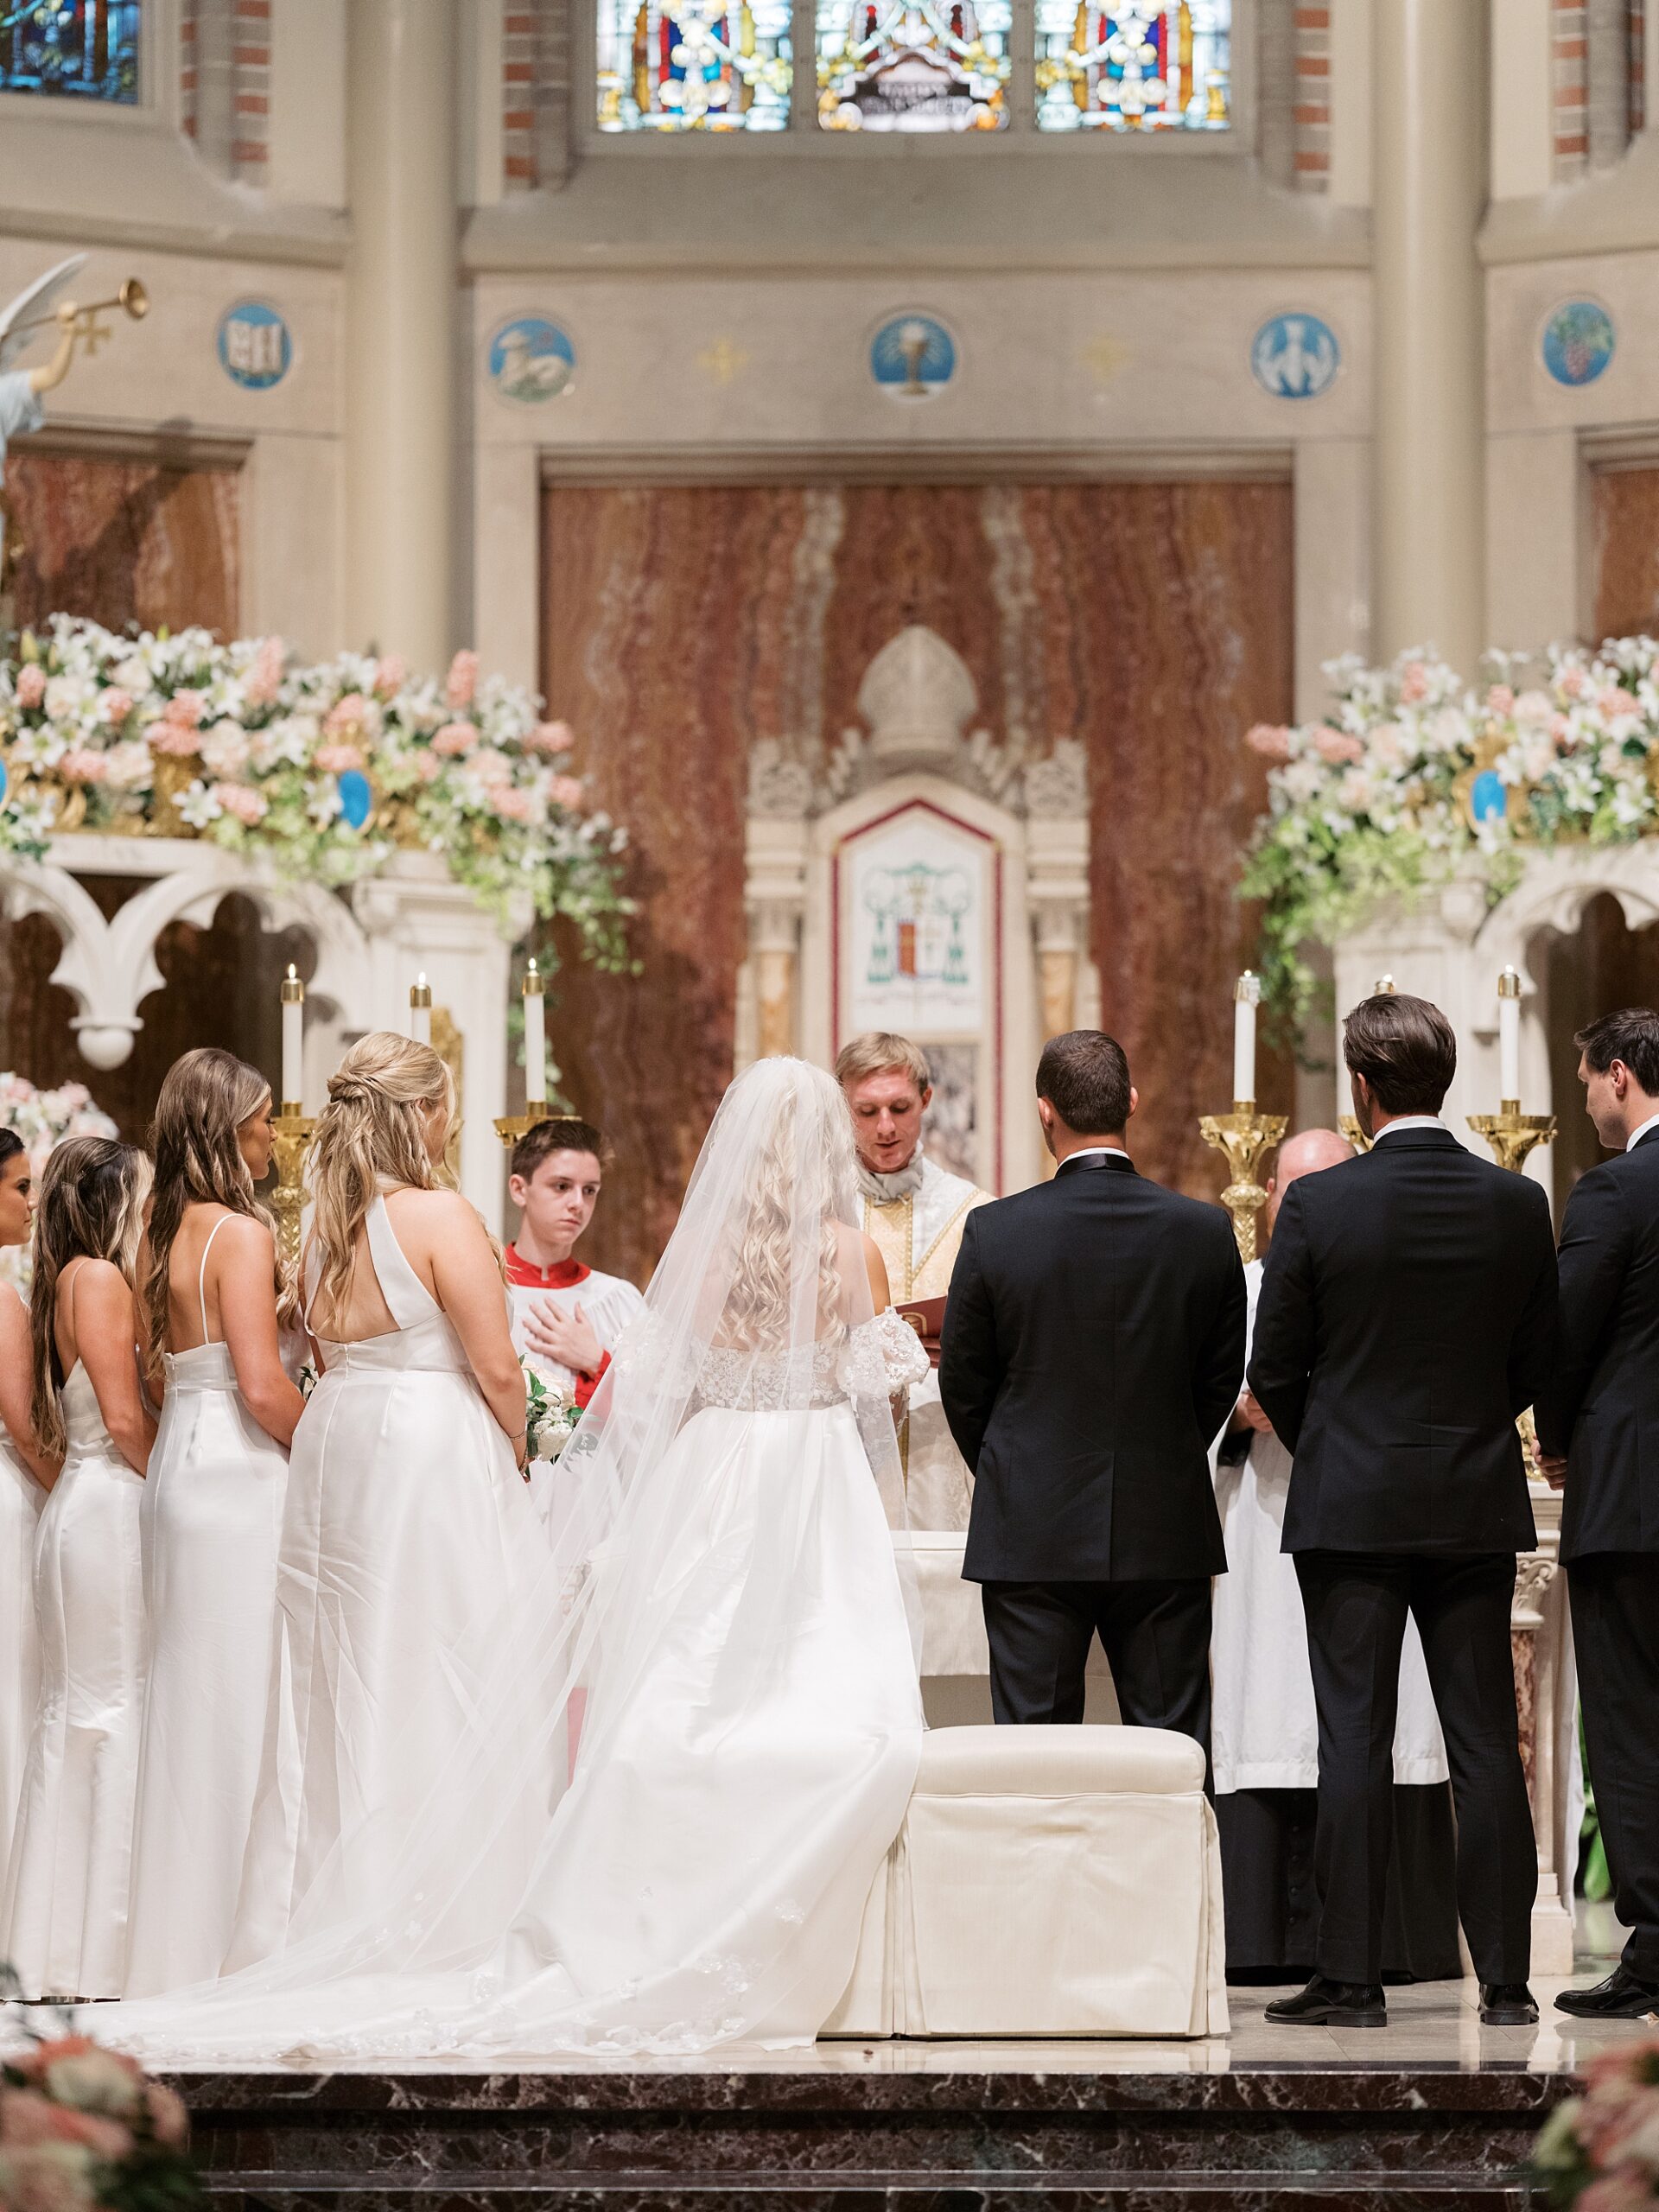 newlyweds stand at alter with wedding party for traditional ceremony at Cathedral of St. John